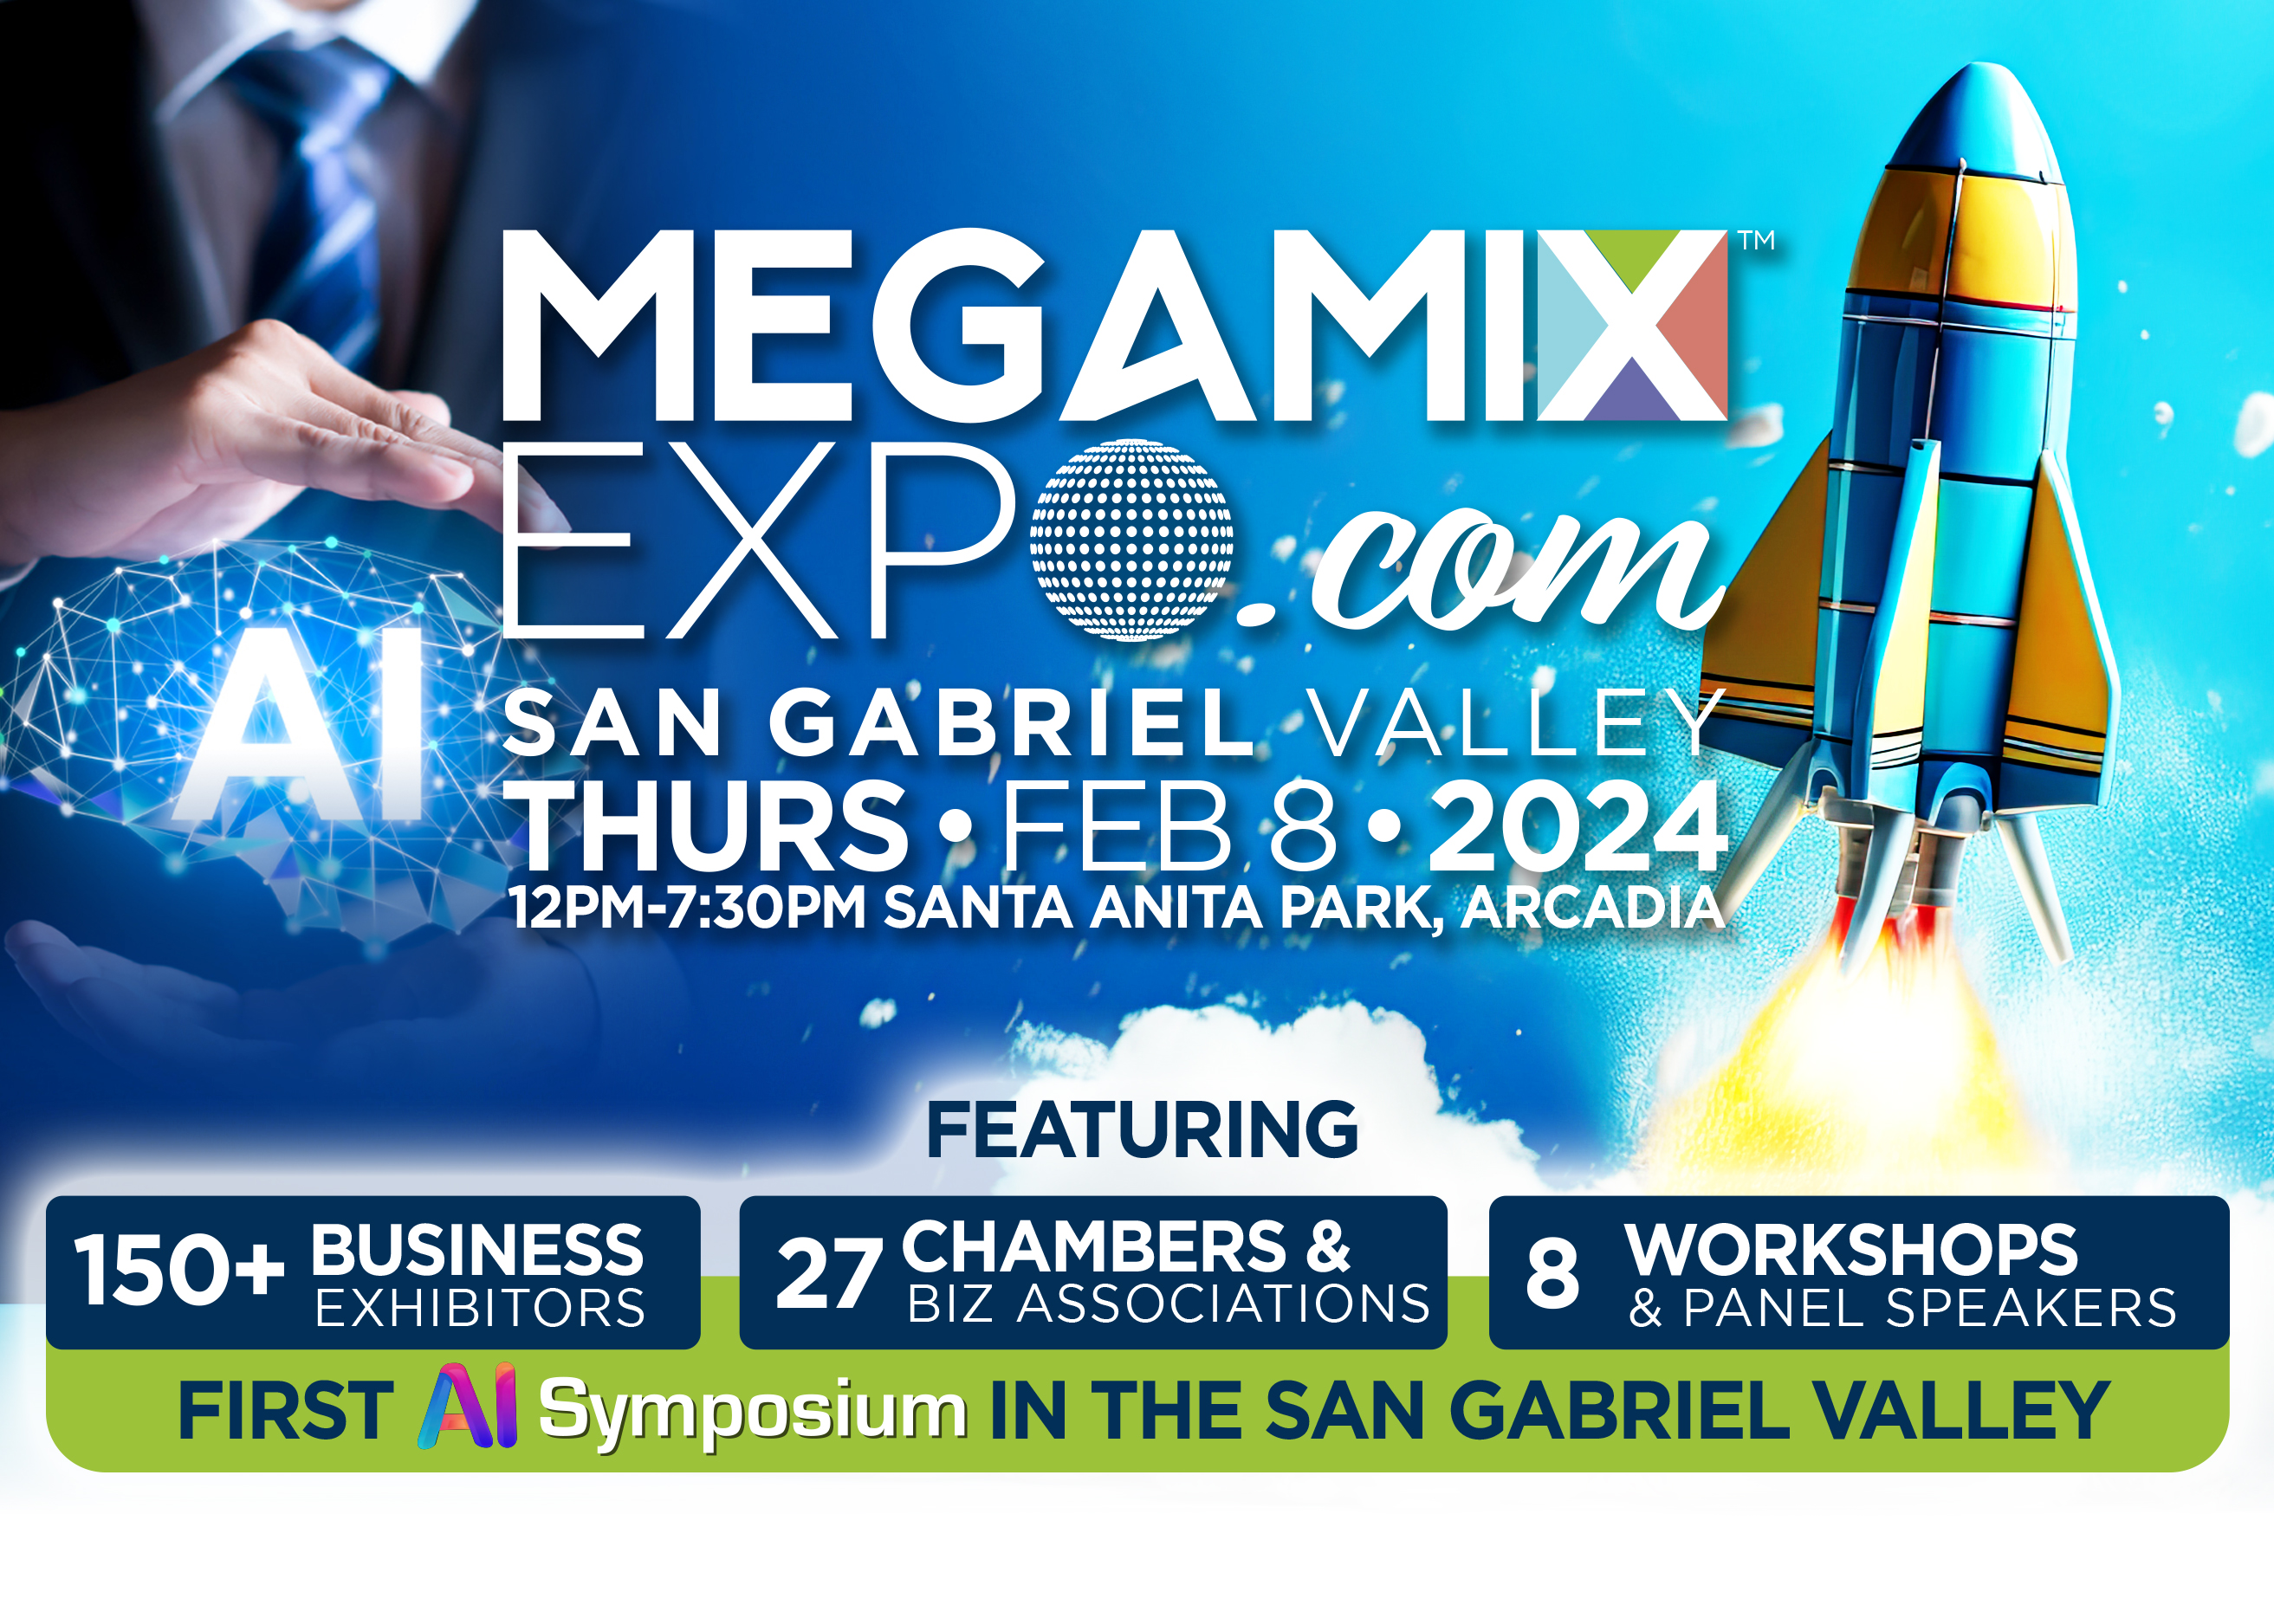 MegaMix Expo 2024: First Artificial Intelligence Symposium in the San Gabriel Valley